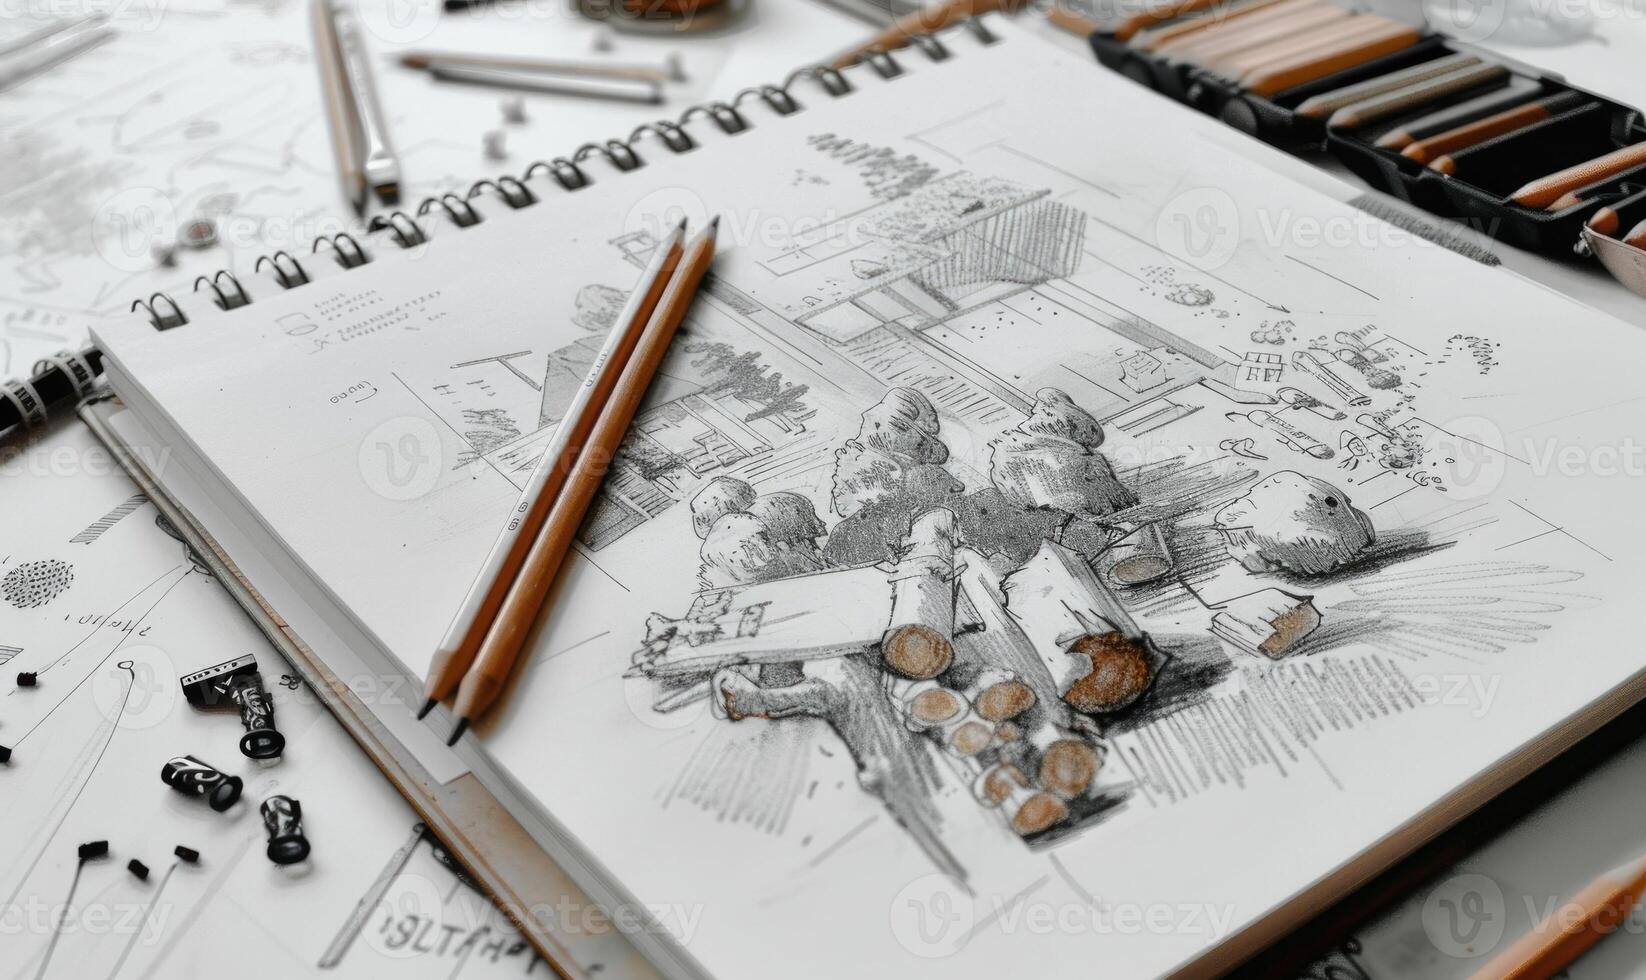 A sketchpad with pencil sketches and doodles scattered across its pages photo